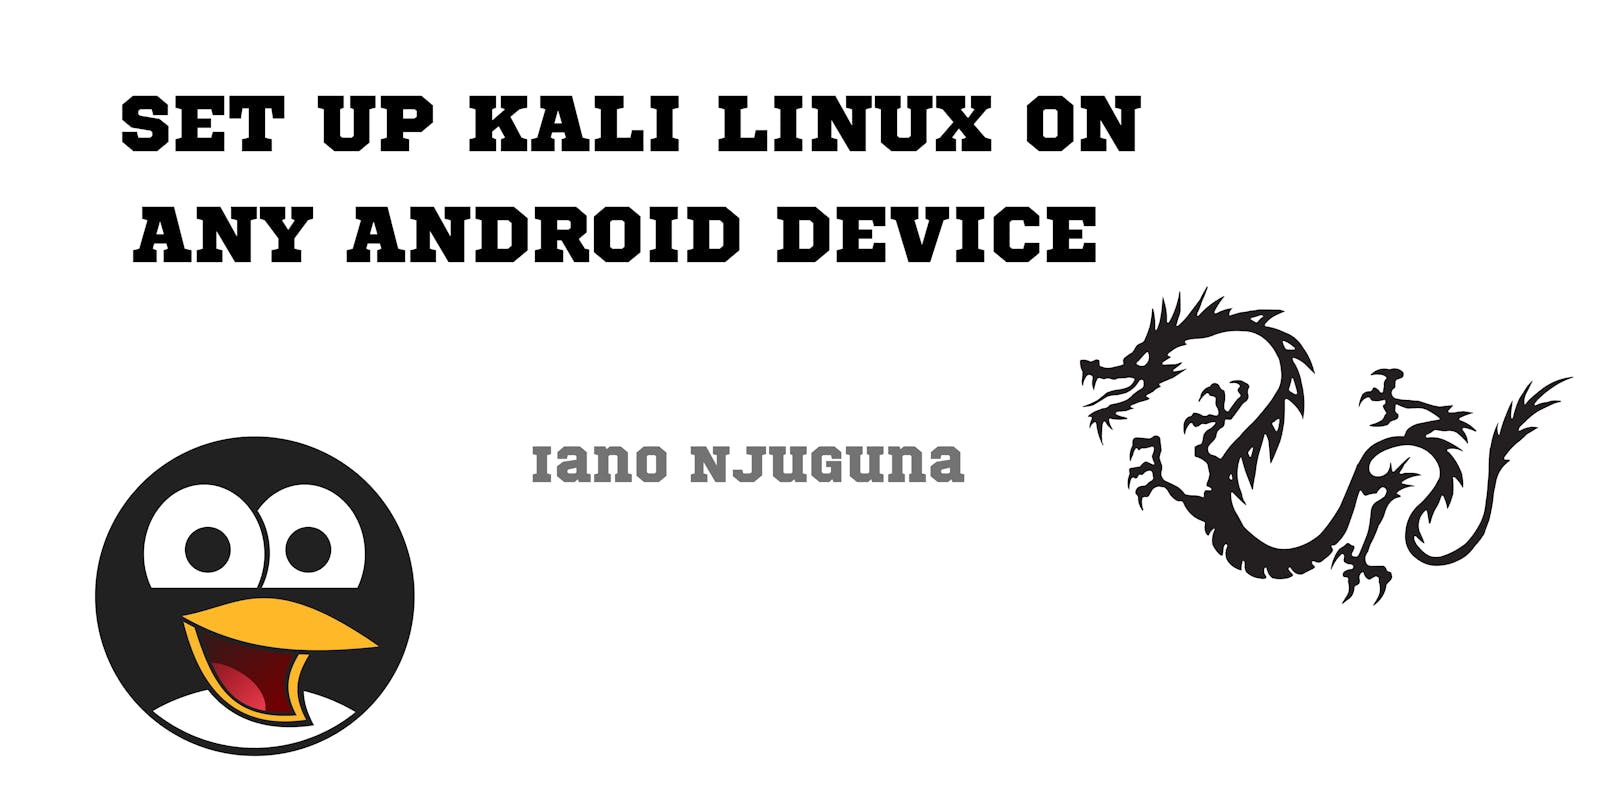 Kali Linux on Android Devices